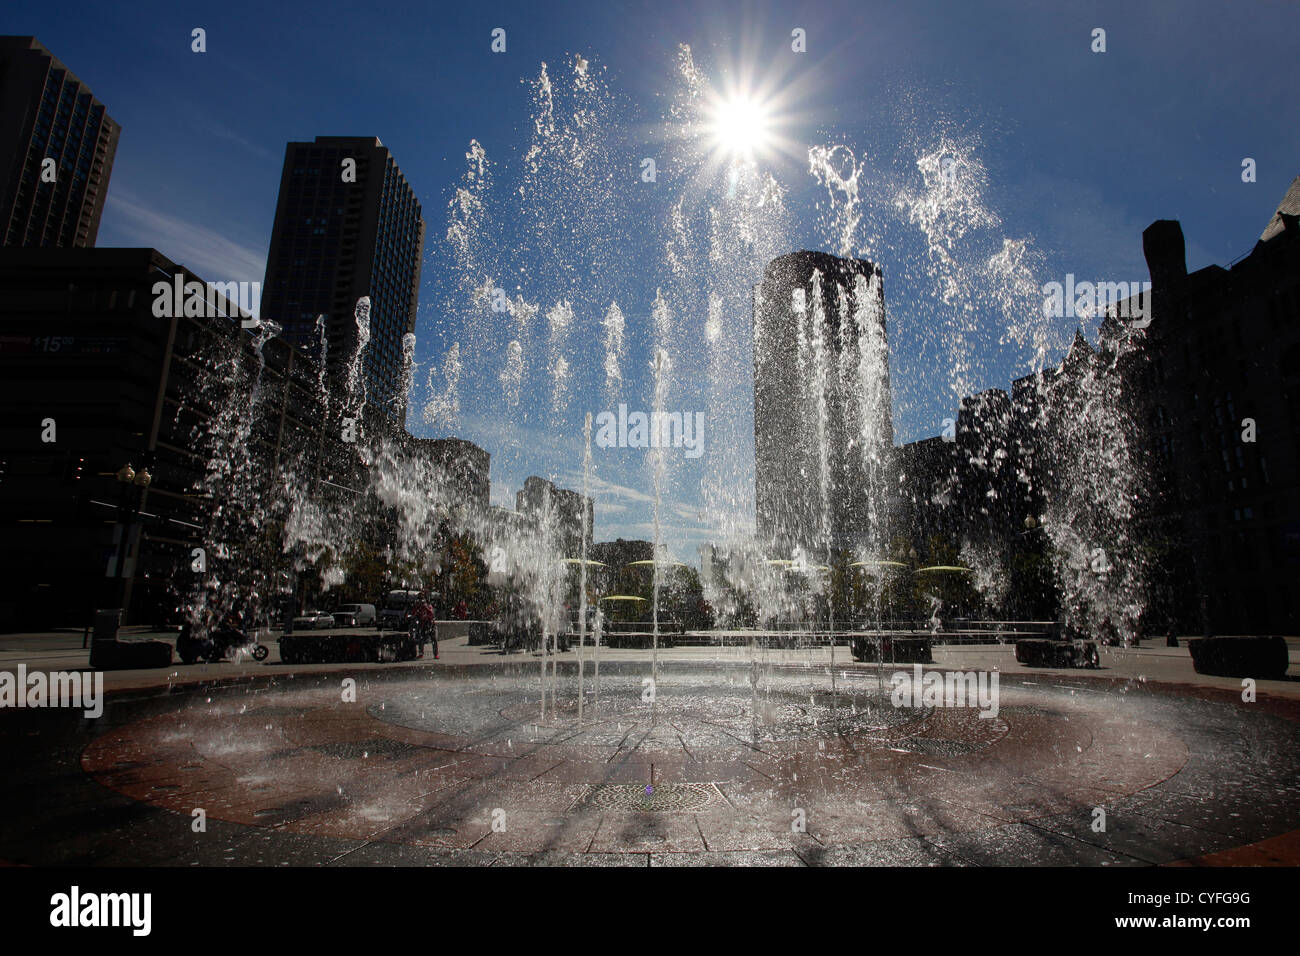 Jets of water at Rings Fountain in the Wharf District of Boston, Massachusetts, America Stock Photo